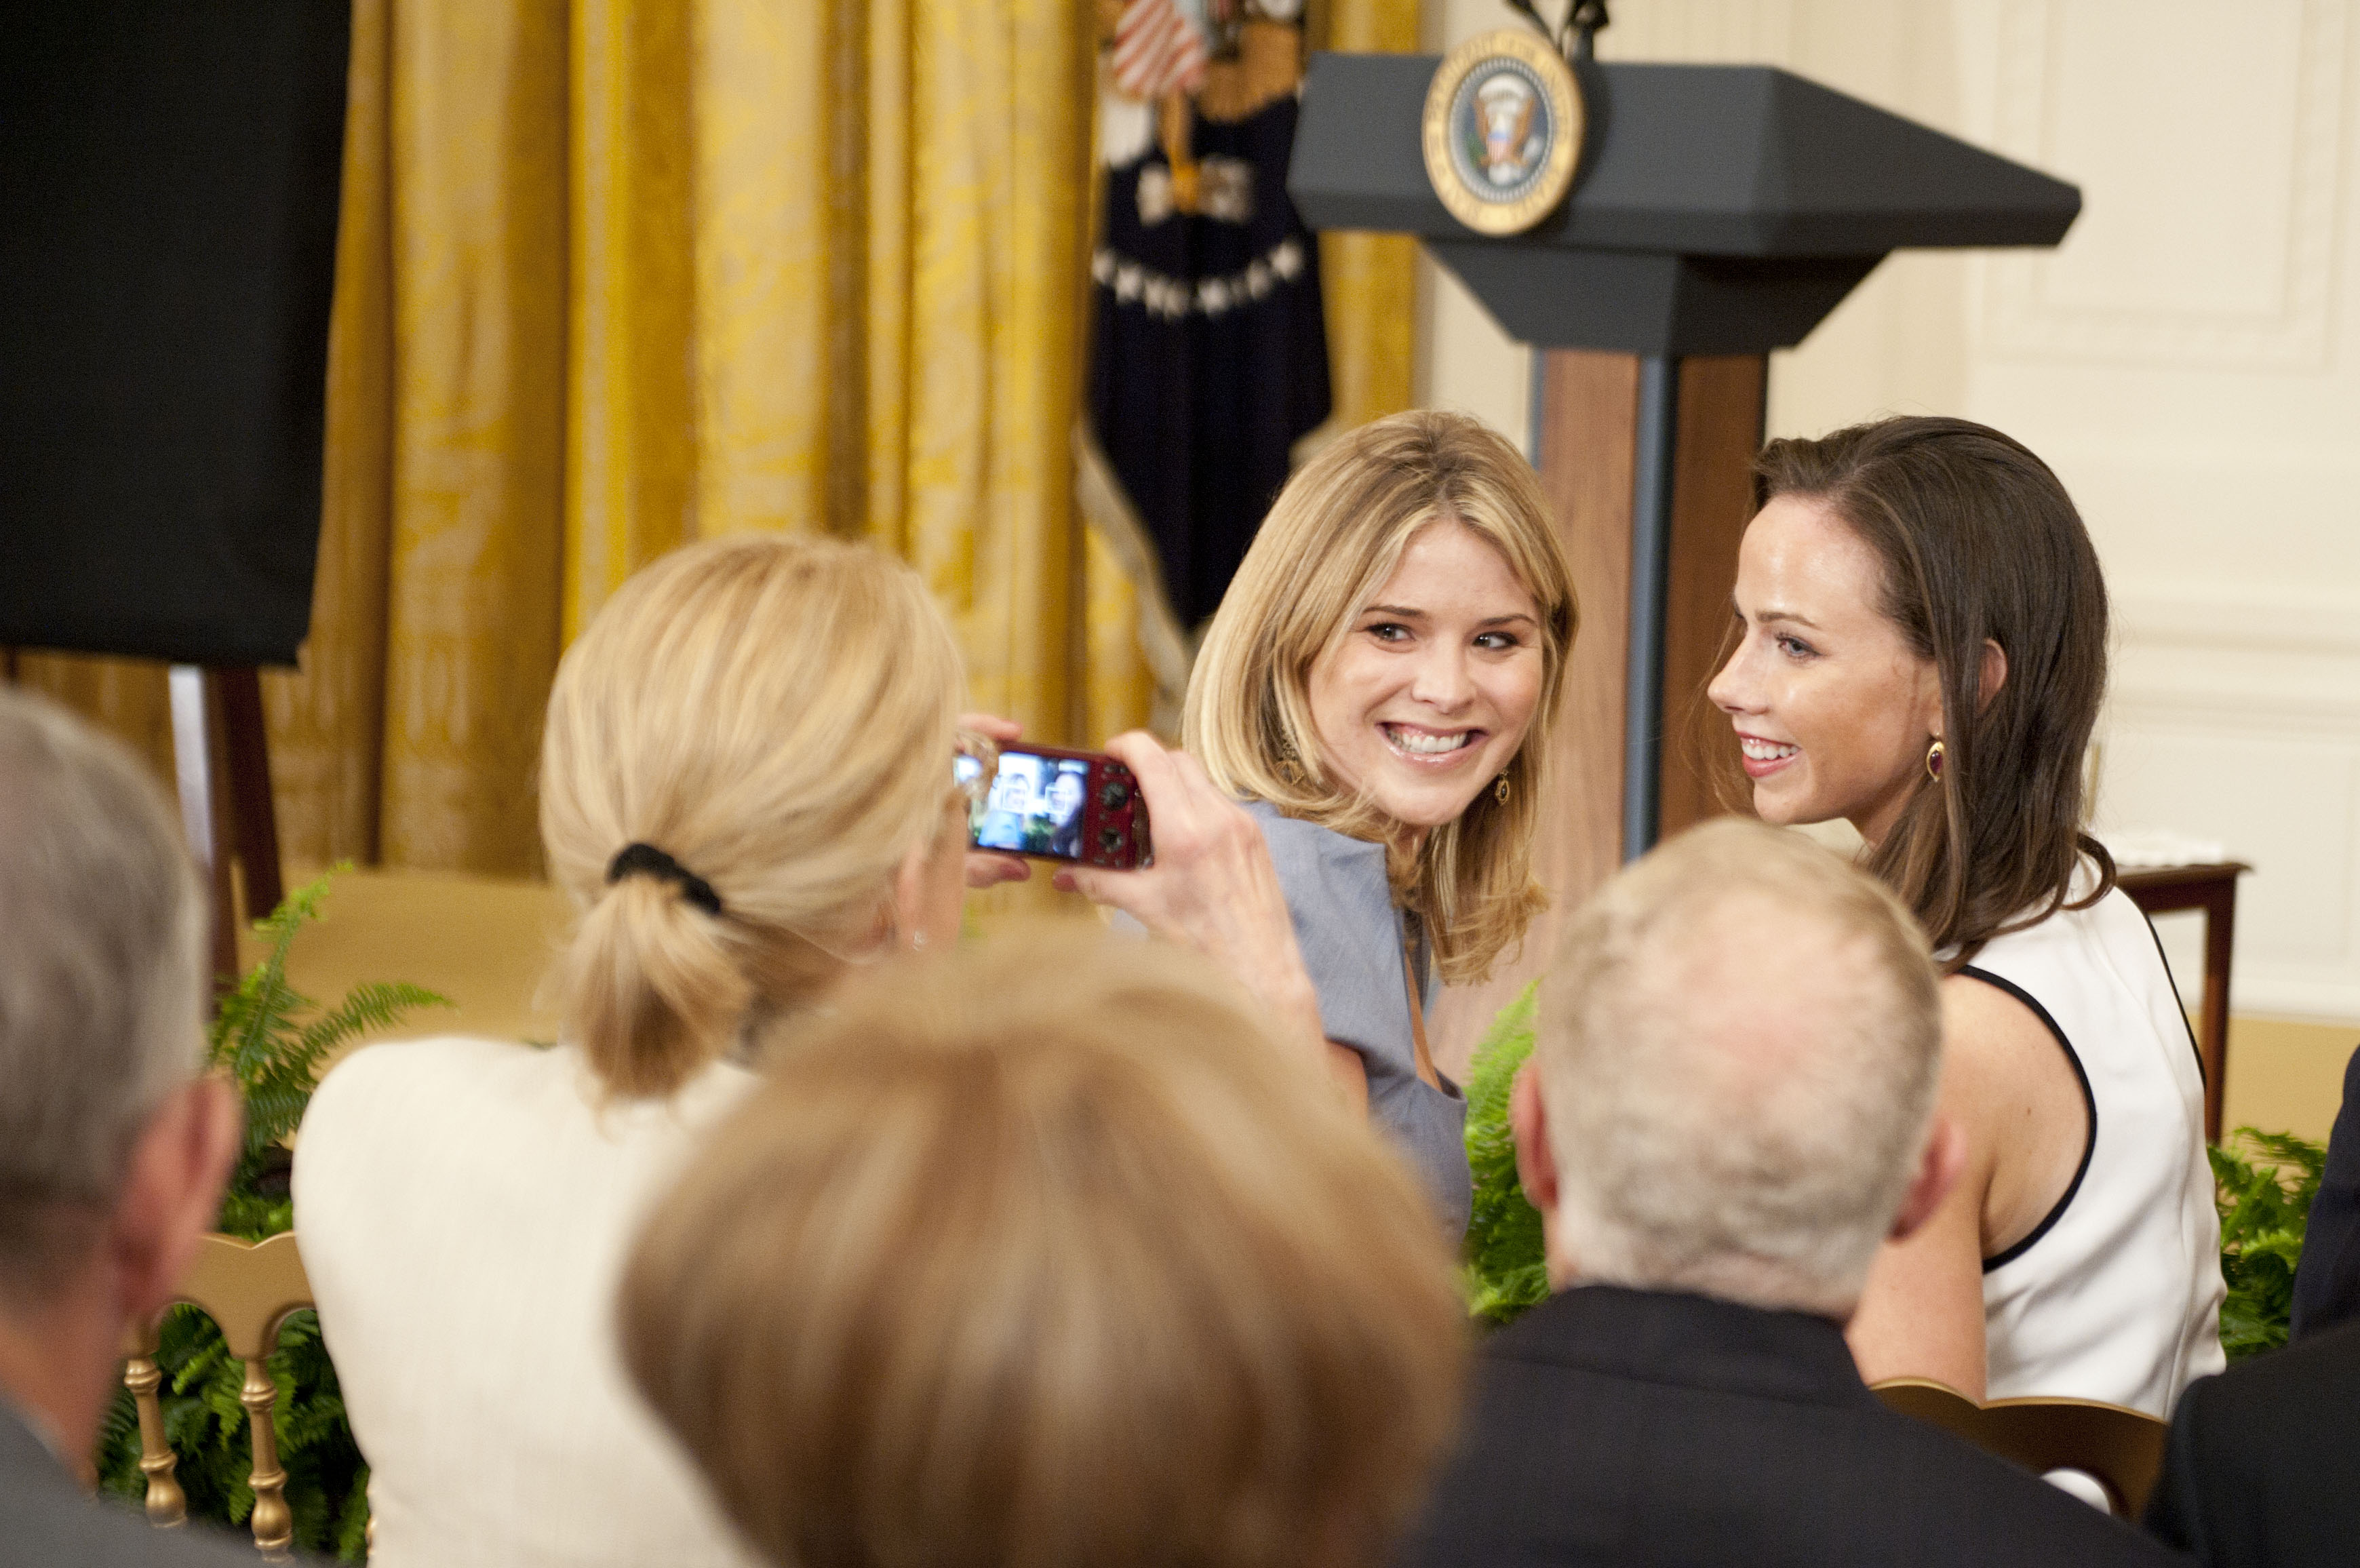 Jenna Bush-Hager and Barbara Bush attend the George W. Bush and Laura Bush Portrait unveiling at the White House on May 31, 2012 in Washington, DC. (Leigh Vogel—Getty Images)